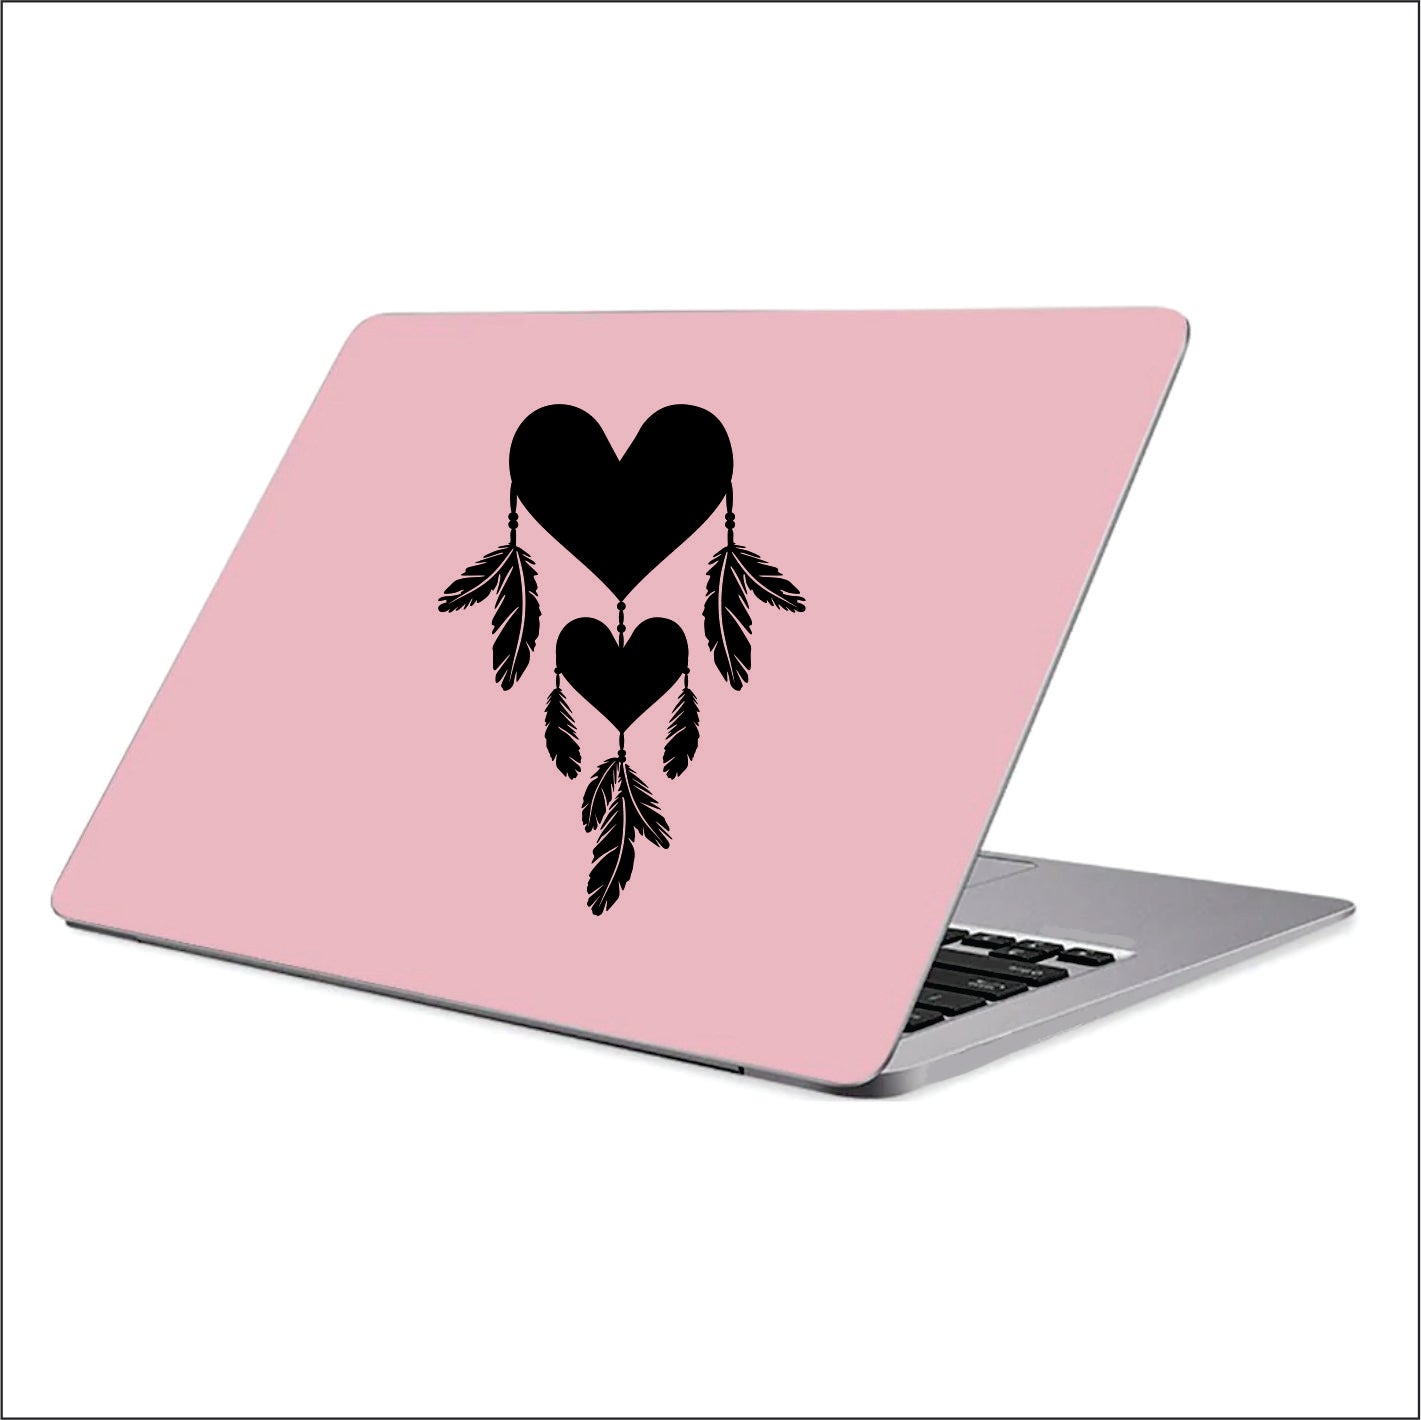 Dreamcatcher Hearts and Feathers Vinyl Decal Sticker